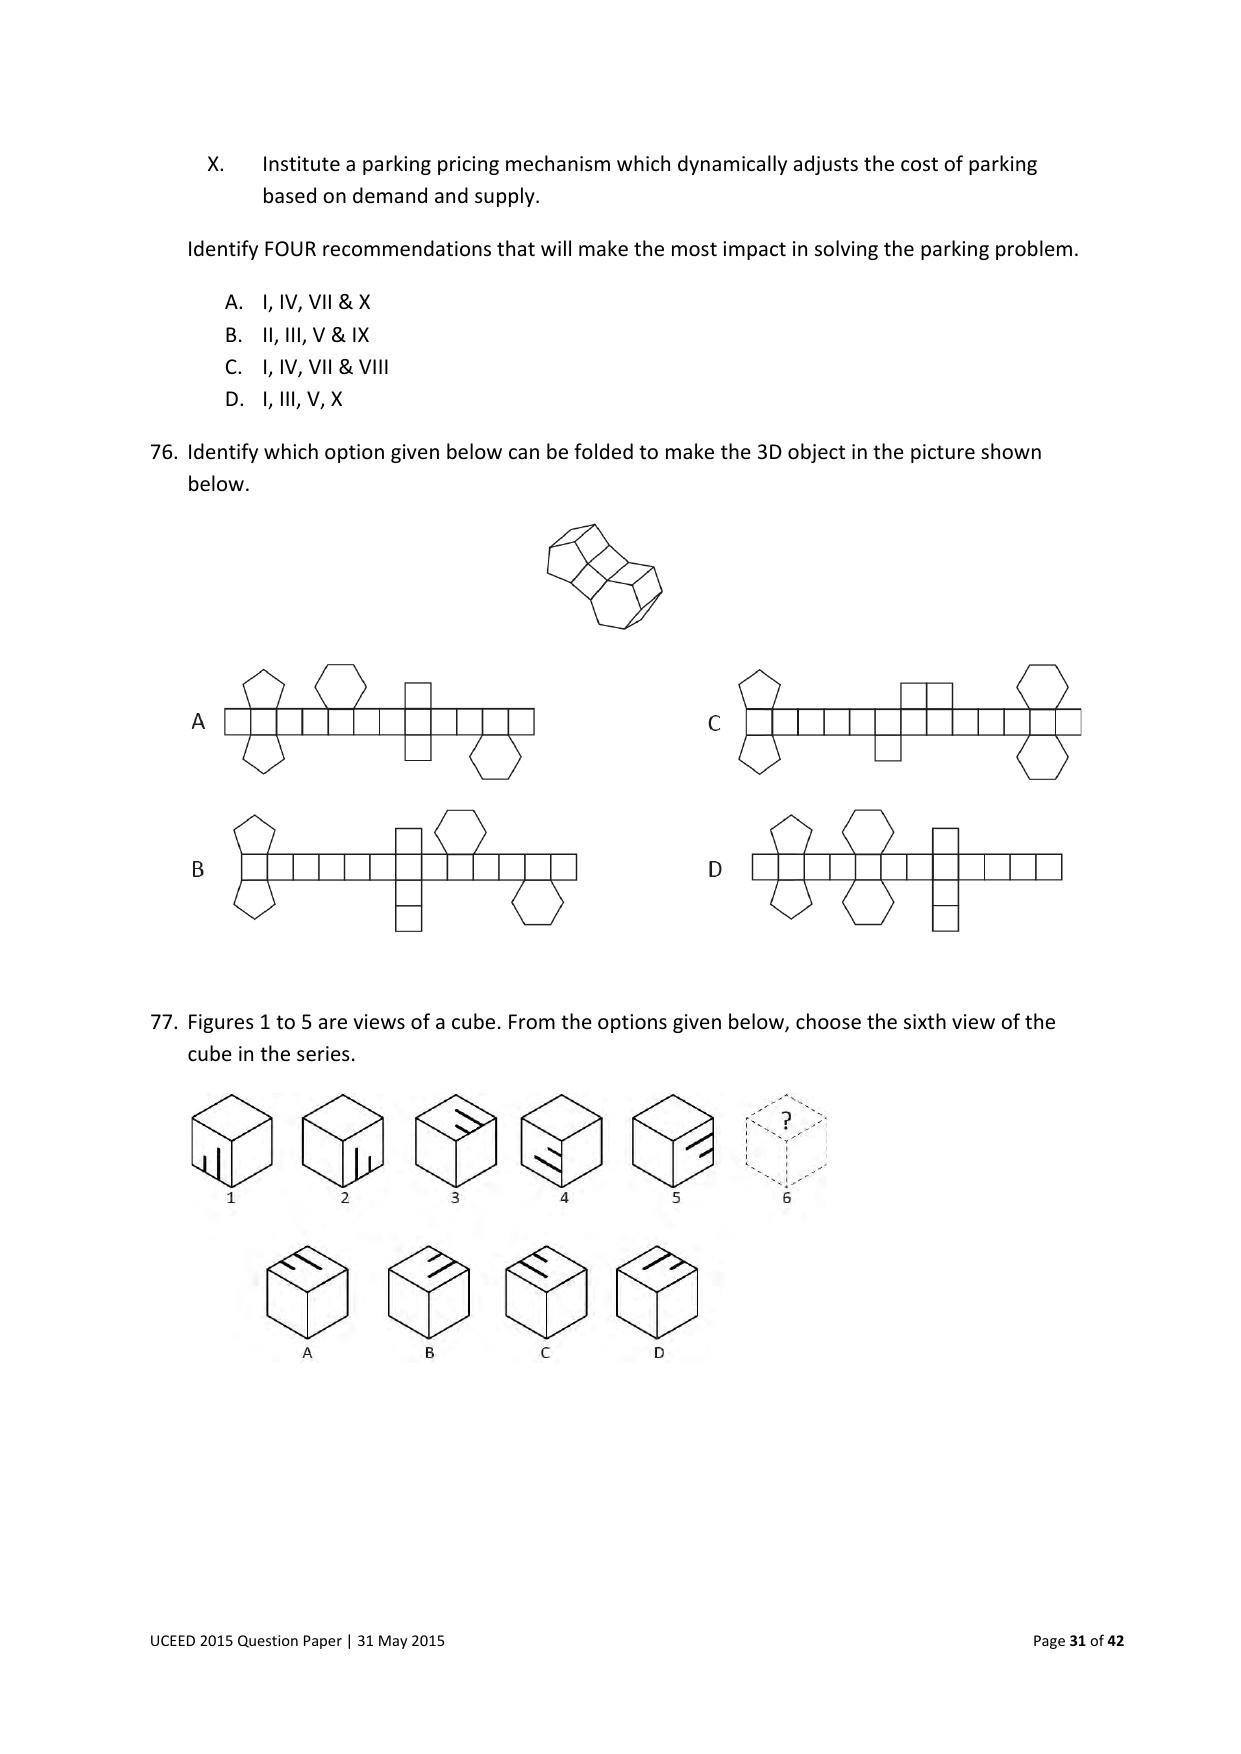 UCEED 2015 Question Paper - Page 31